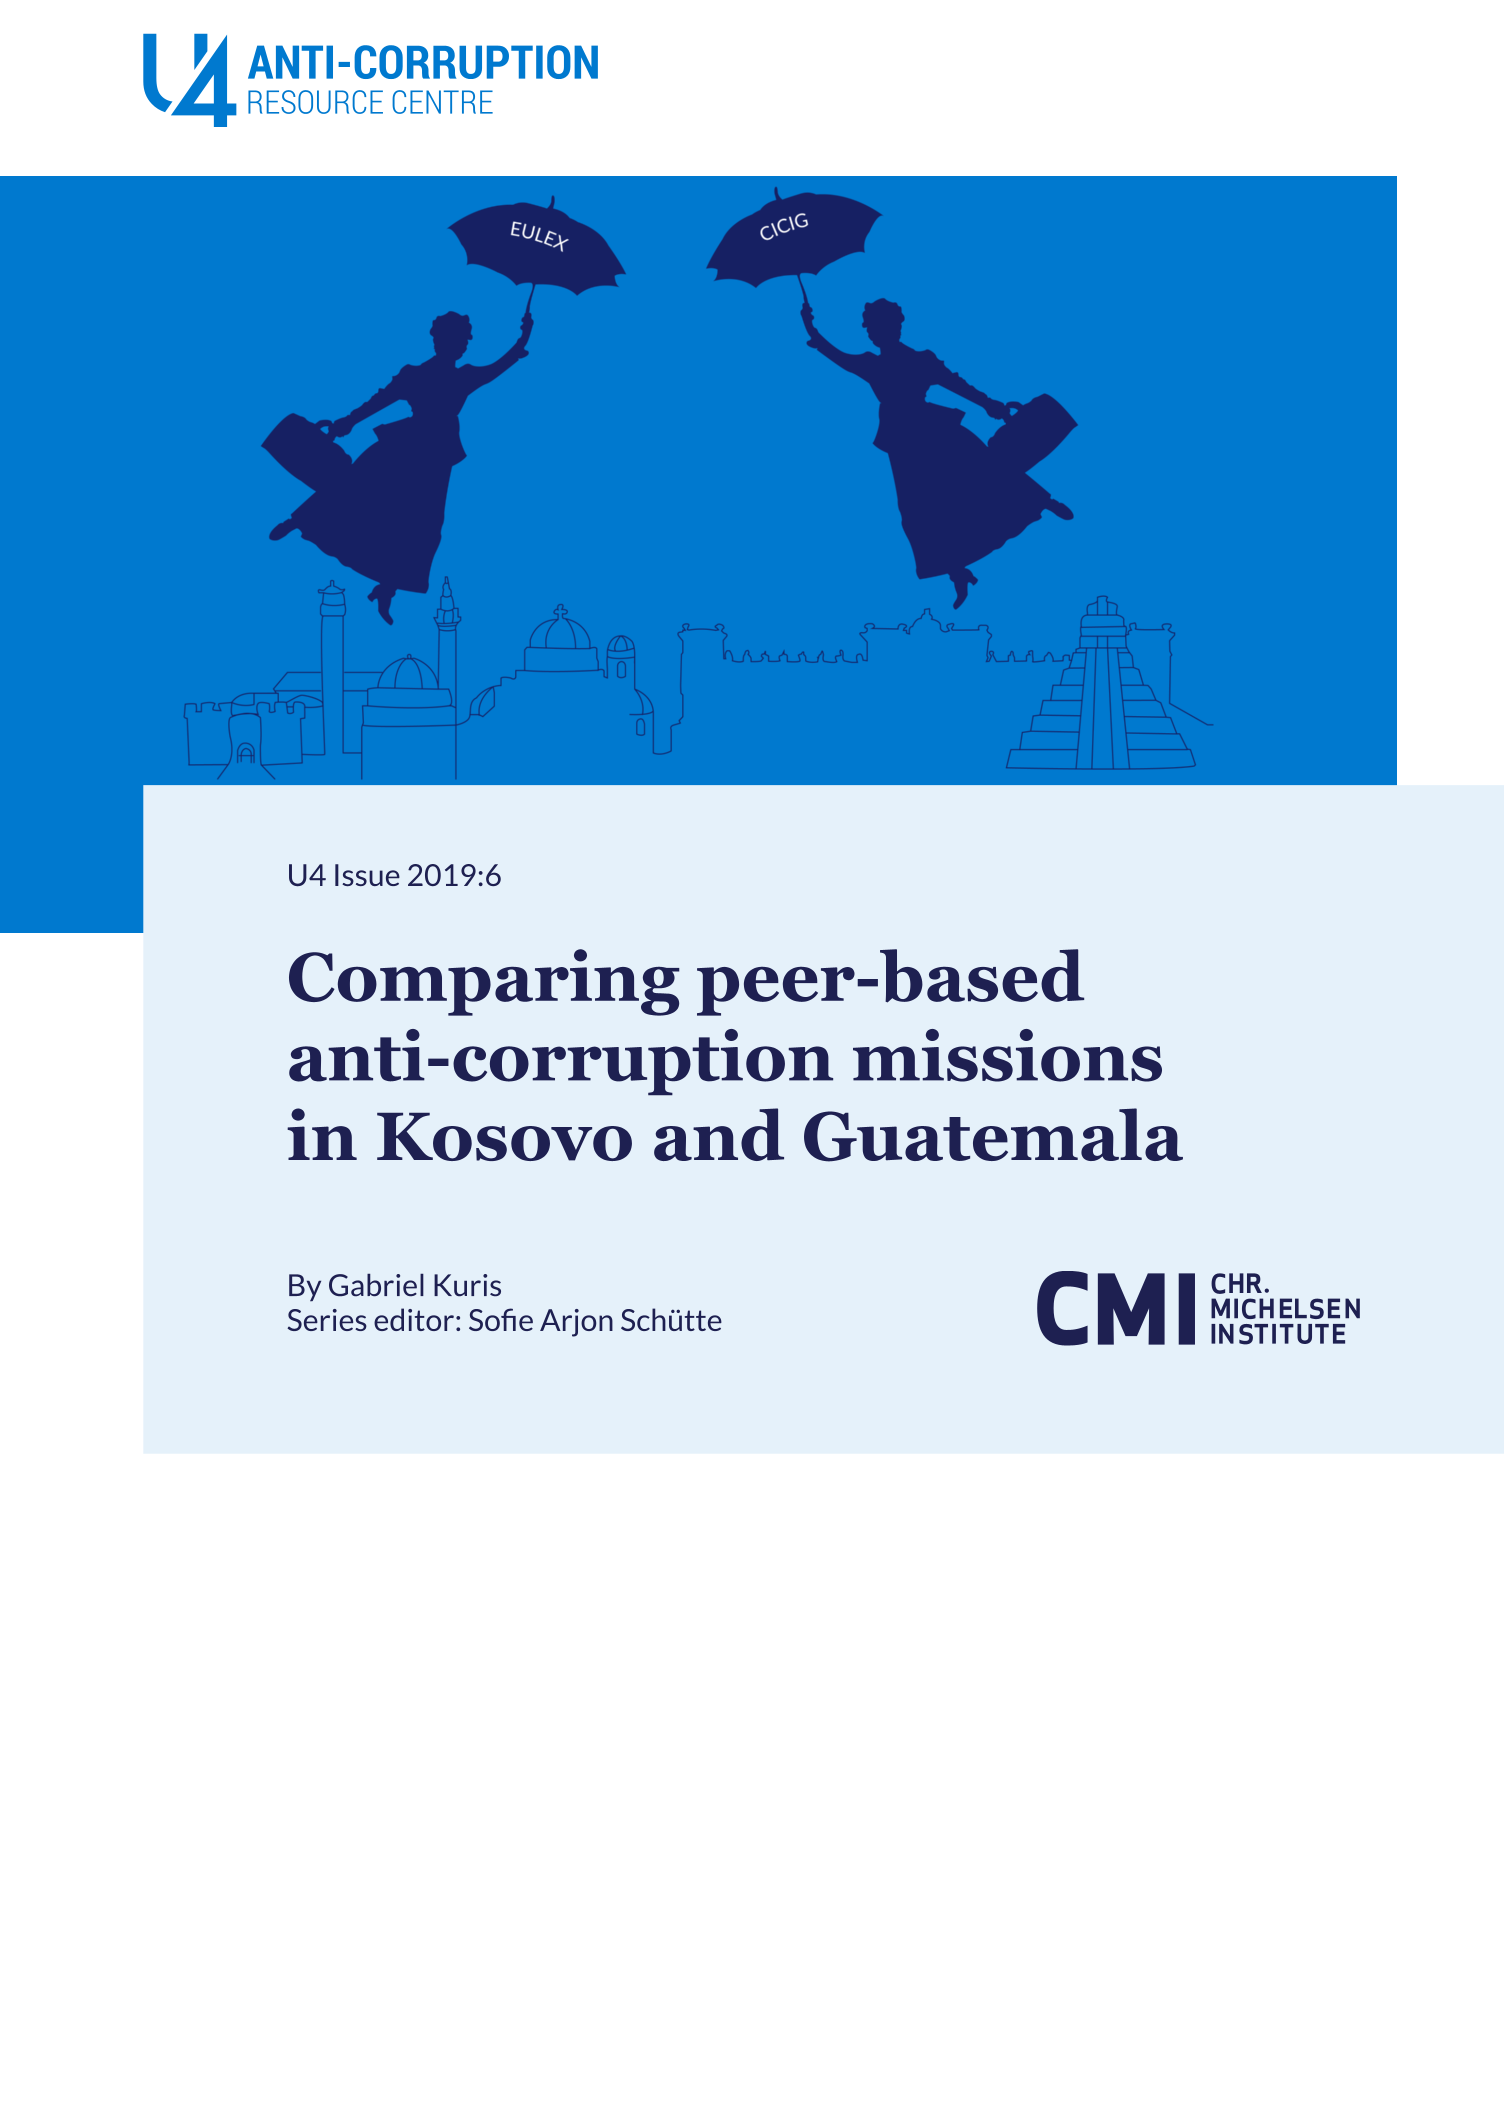 Comparing peer-based anti-corruption missions in Kosovo and Guatemala